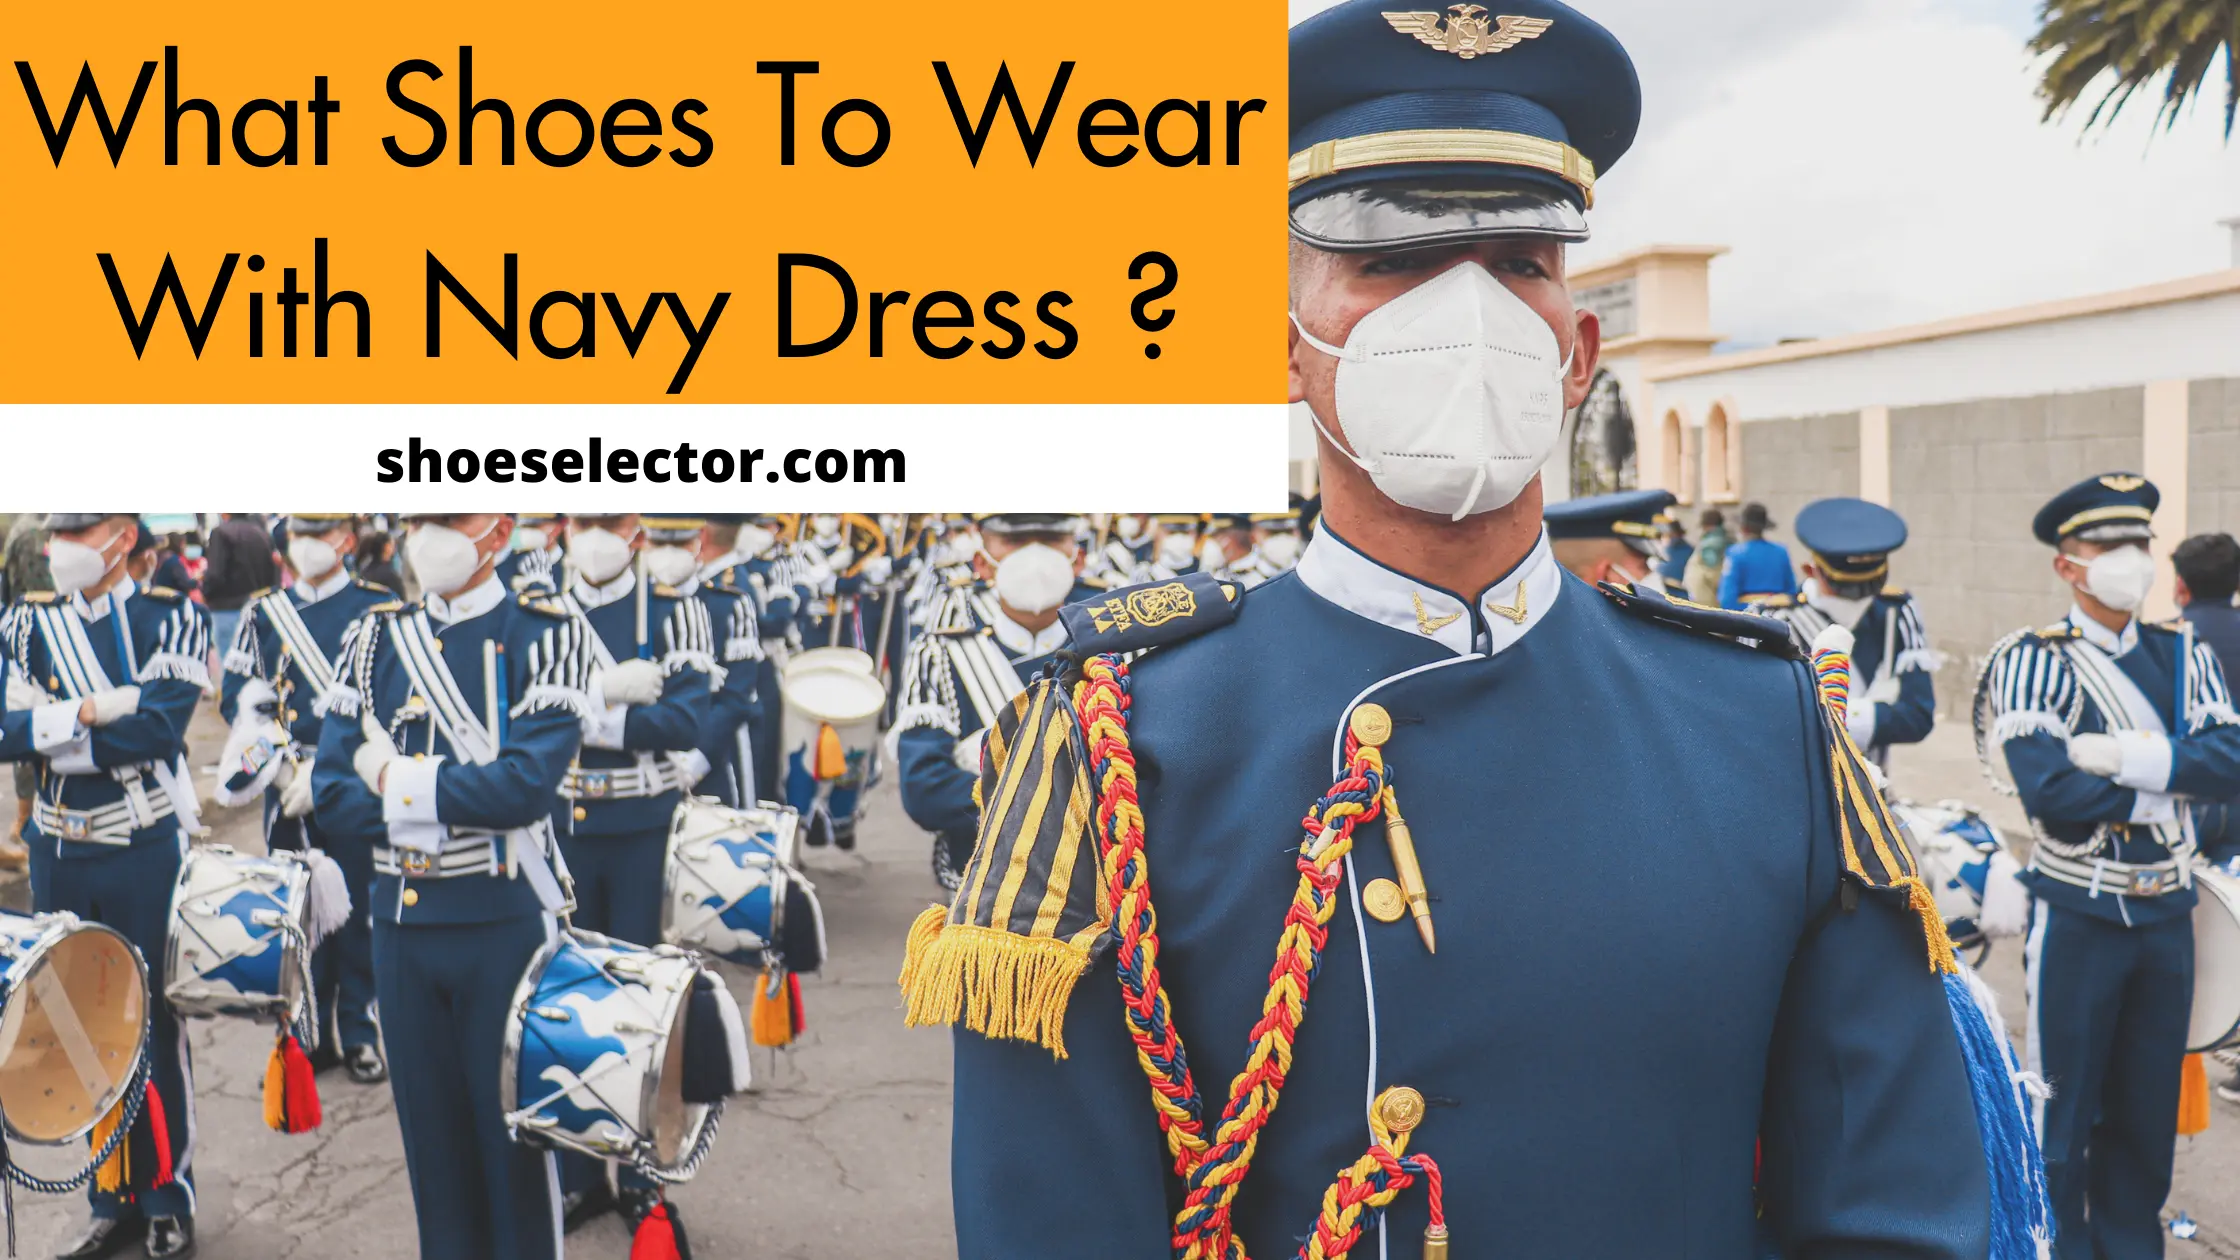 What Shoes To Wear With Navy Dress? - Solution Guide